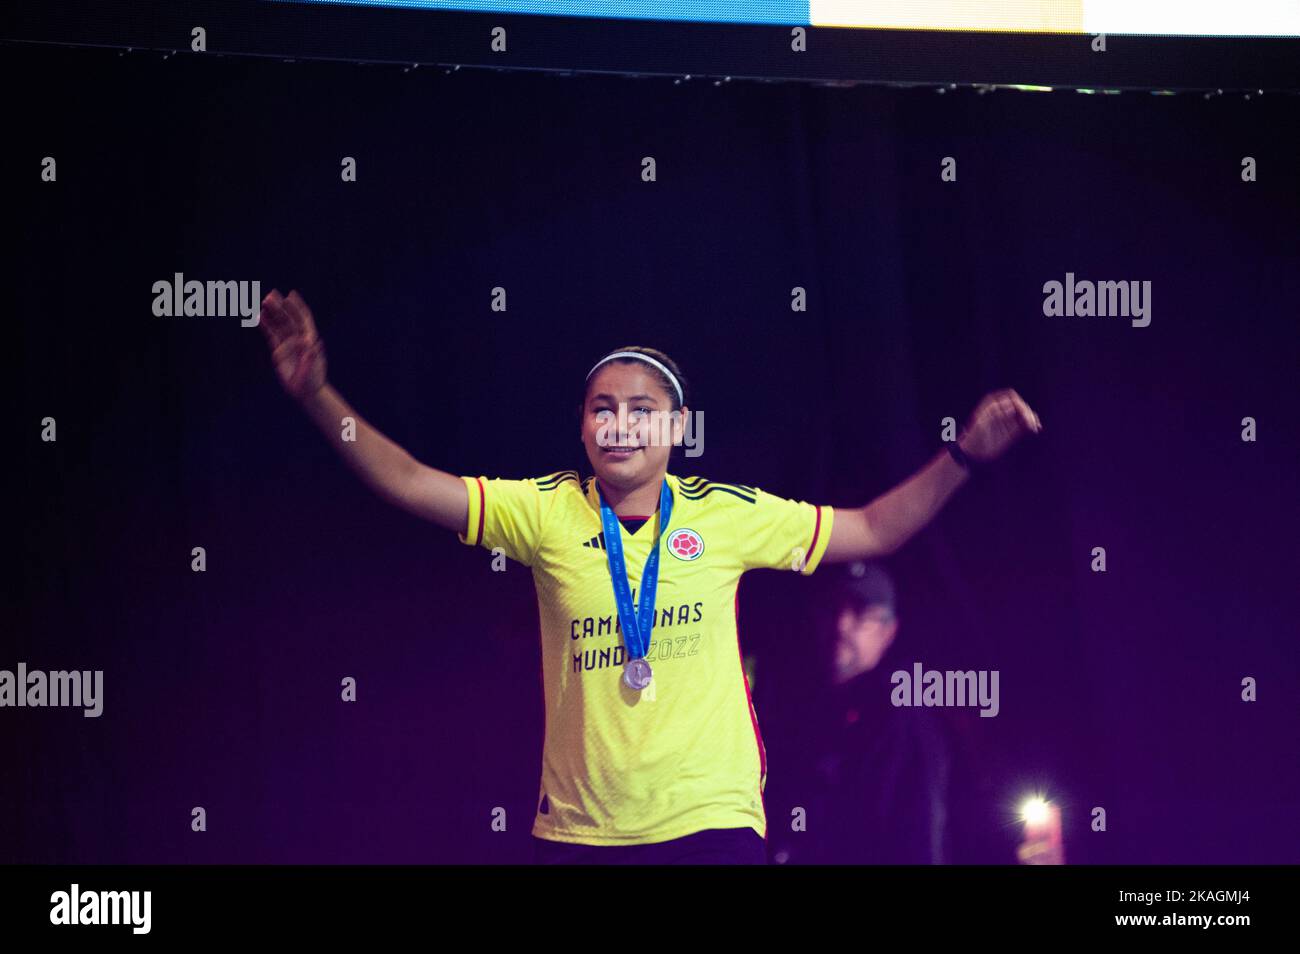 Bogota, Colombia. 02nd Nov, 2022. Player Cristina Motta during the welcoming of Colombia's FIFA U-17 Womens team after the U-17 World Cup after reaching the final match against Spain, in Bogota, Colombia, November 2, 2022. Photo by: Chepa Beltran/Long Visual Press Credit: Long Visual Press/Alamy Live News Stock Photo